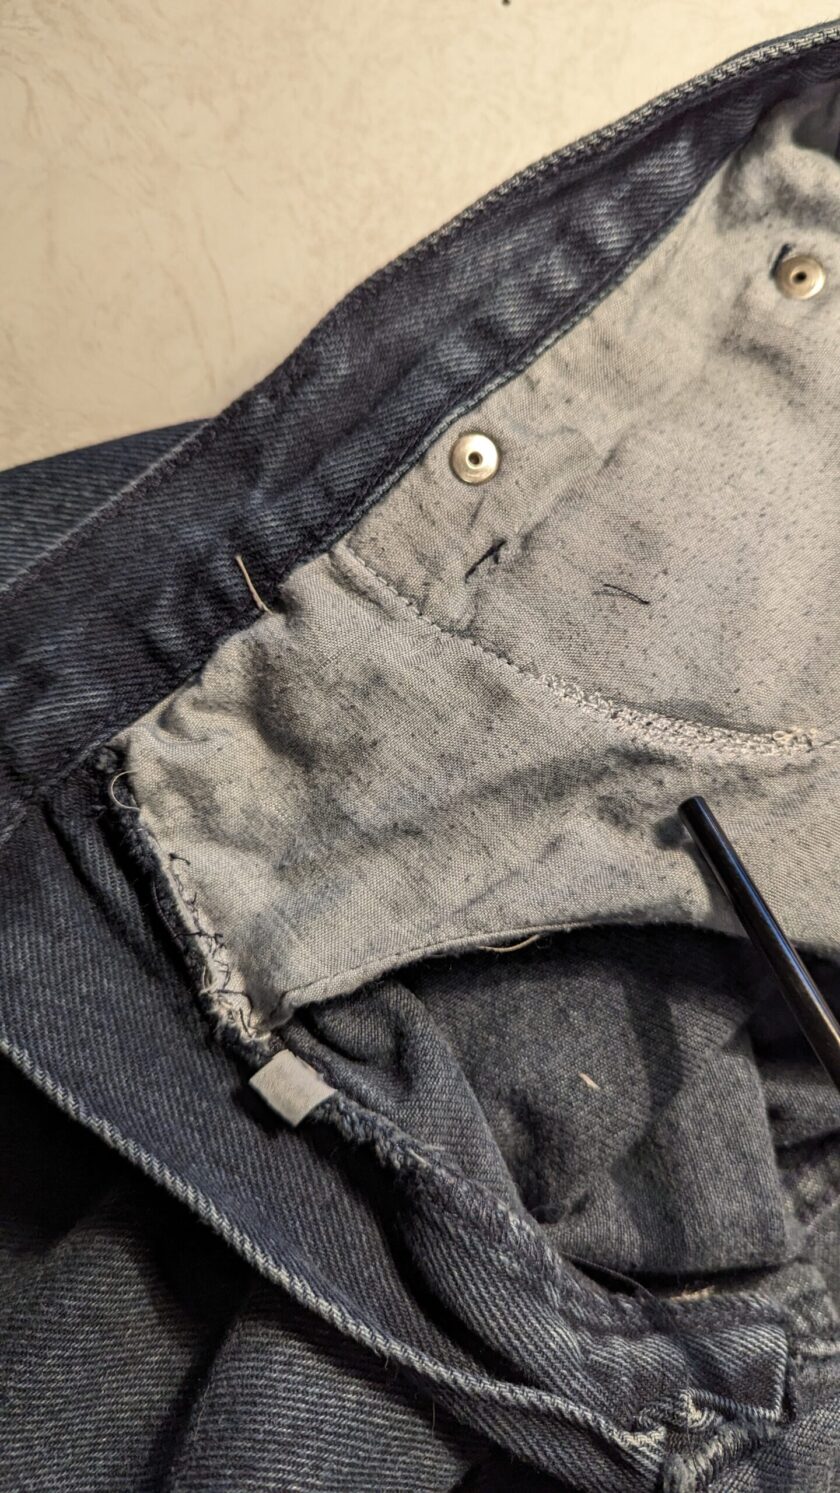 A close up of a pair of jeans with a pair of scissors.